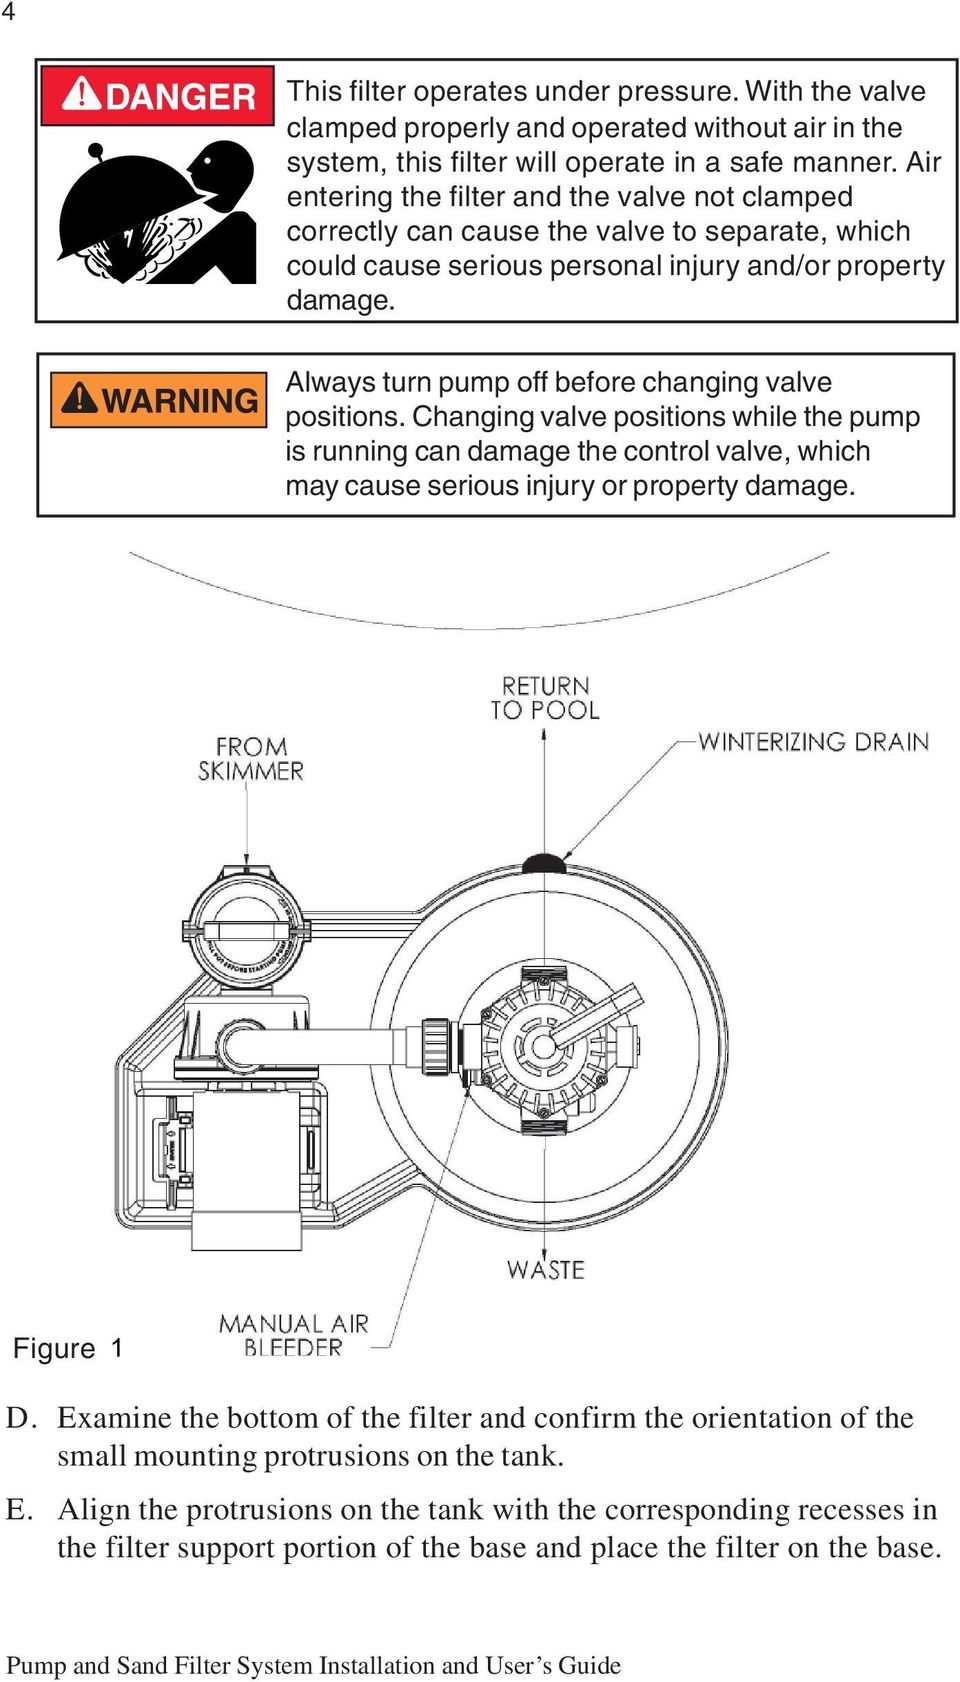 Always turn pump off bfor changng valv postons. Changng valv postons whl th pump s runnng can damag th control valv, whch may caus srous njury or proprty damag. Fgur 1. D.